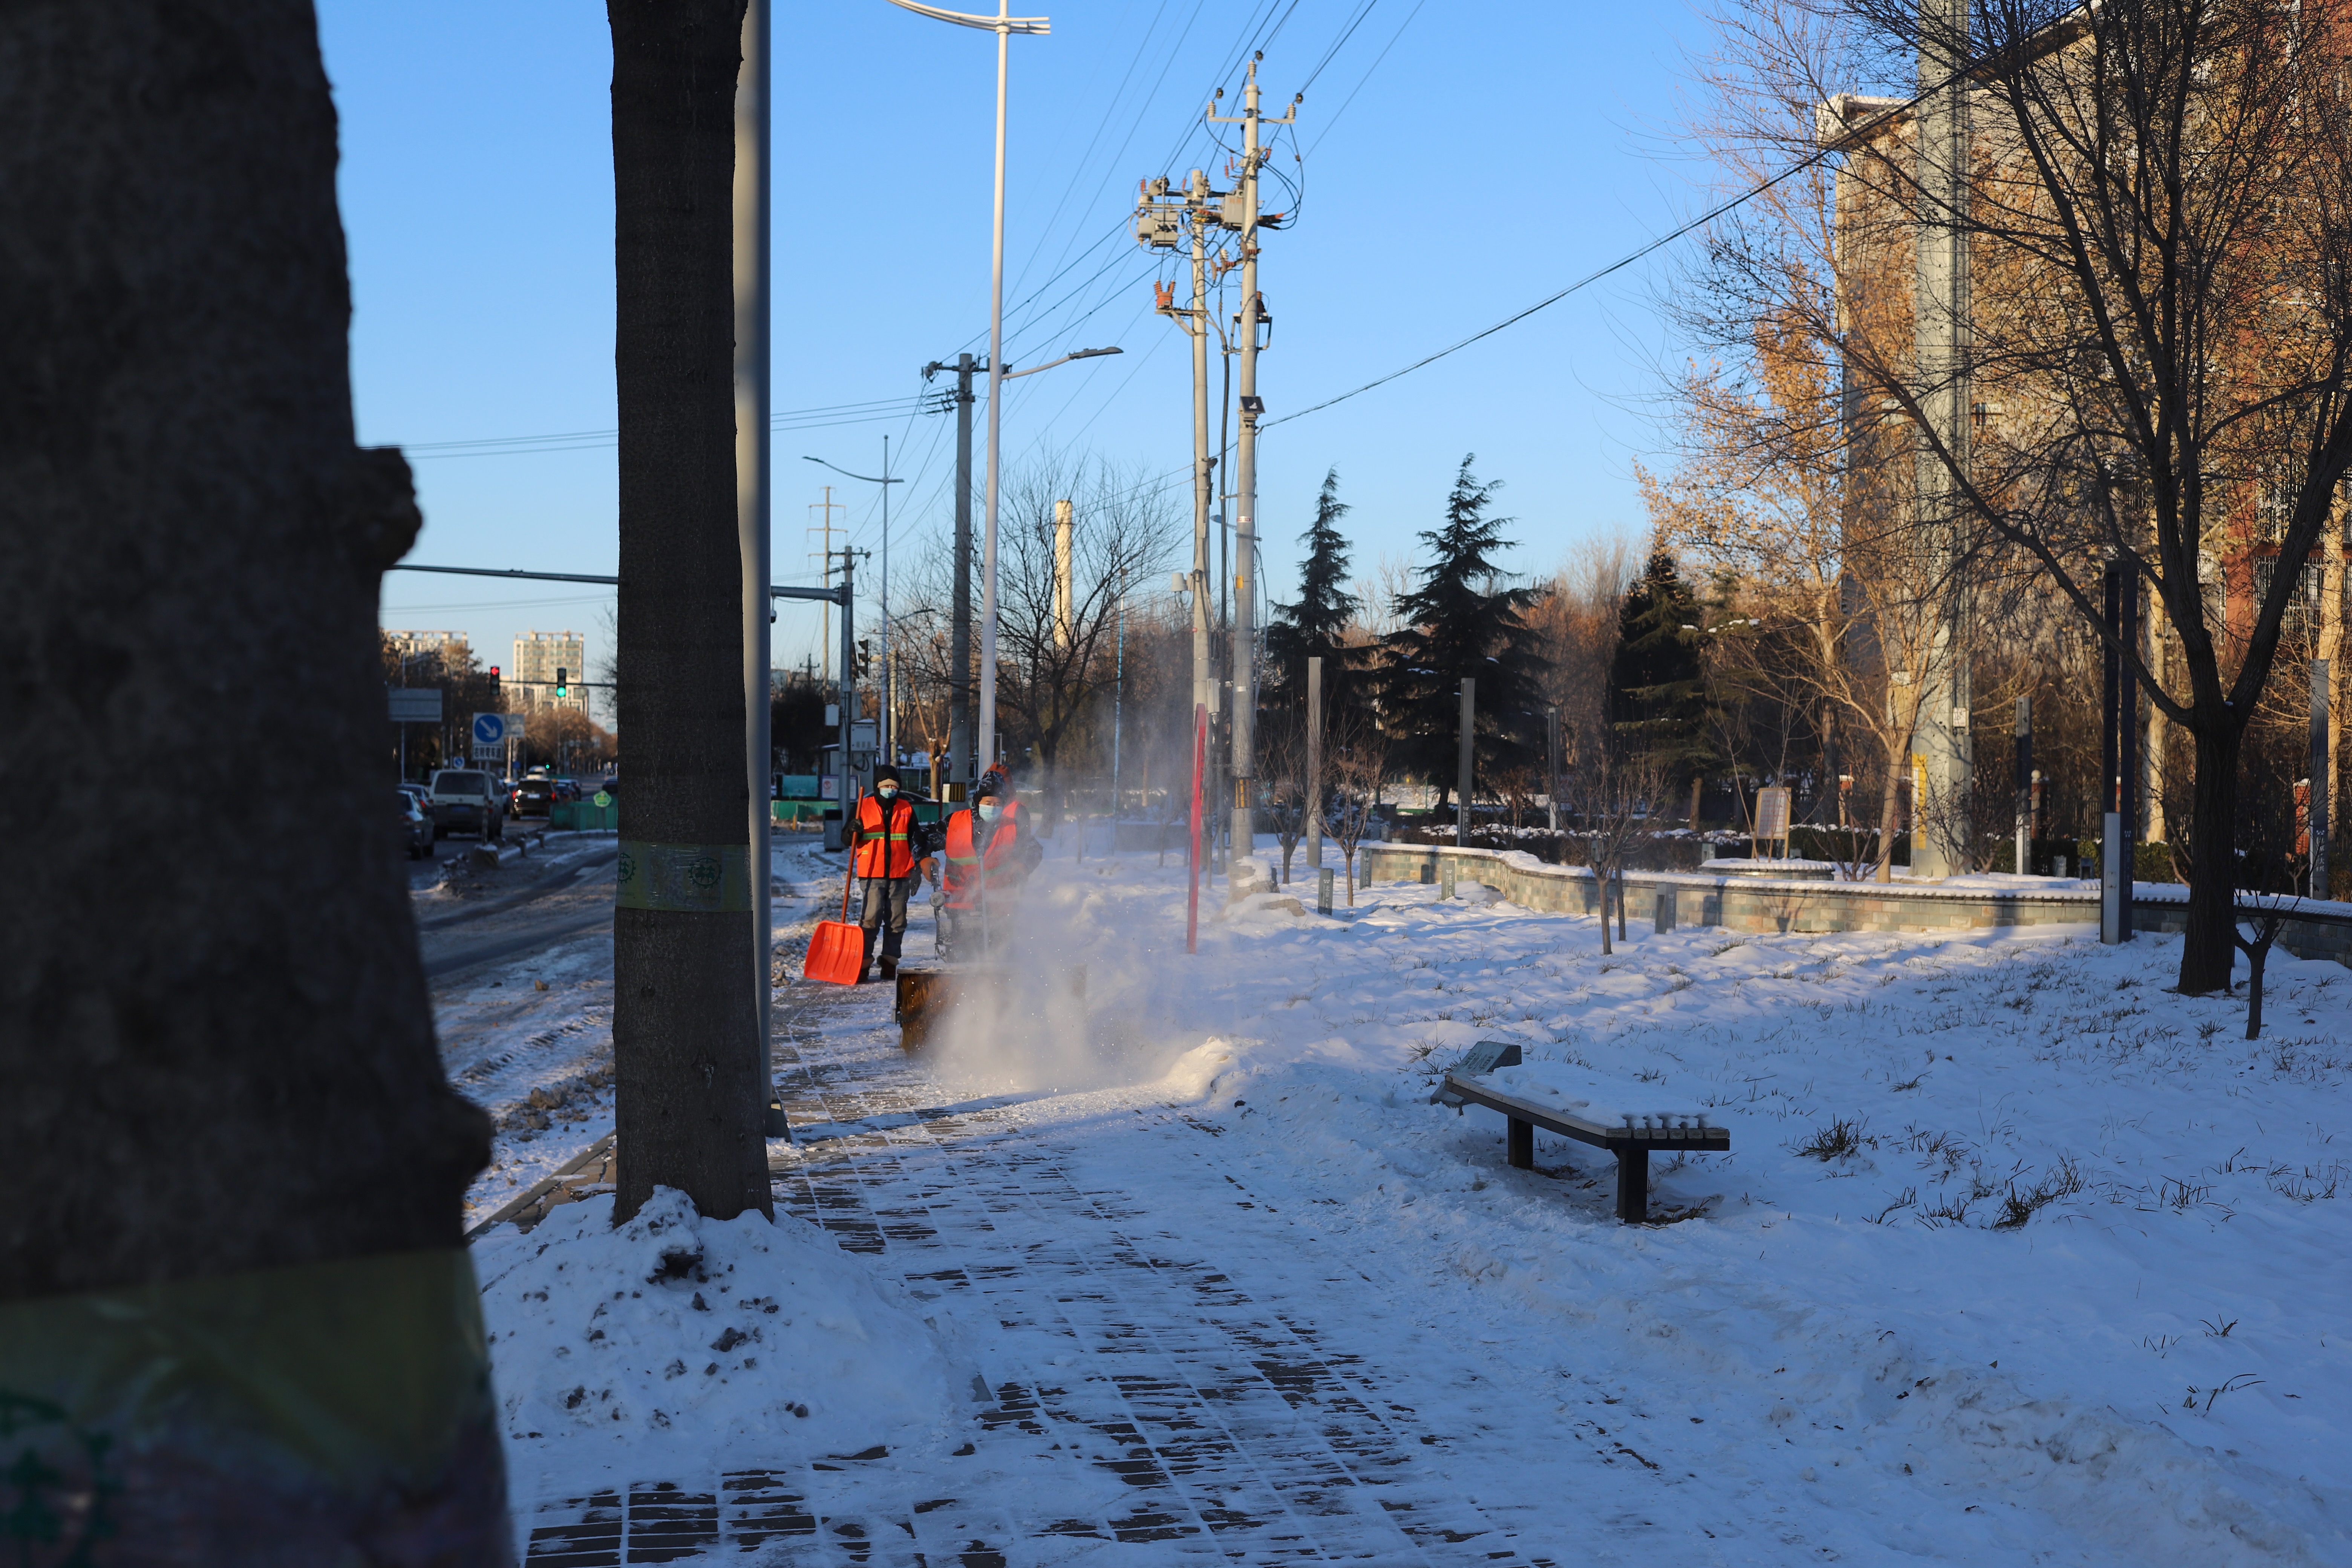 Giant rotating scrubbing brushes pushed back and forth along the pavements help keep them free of snow and ice.